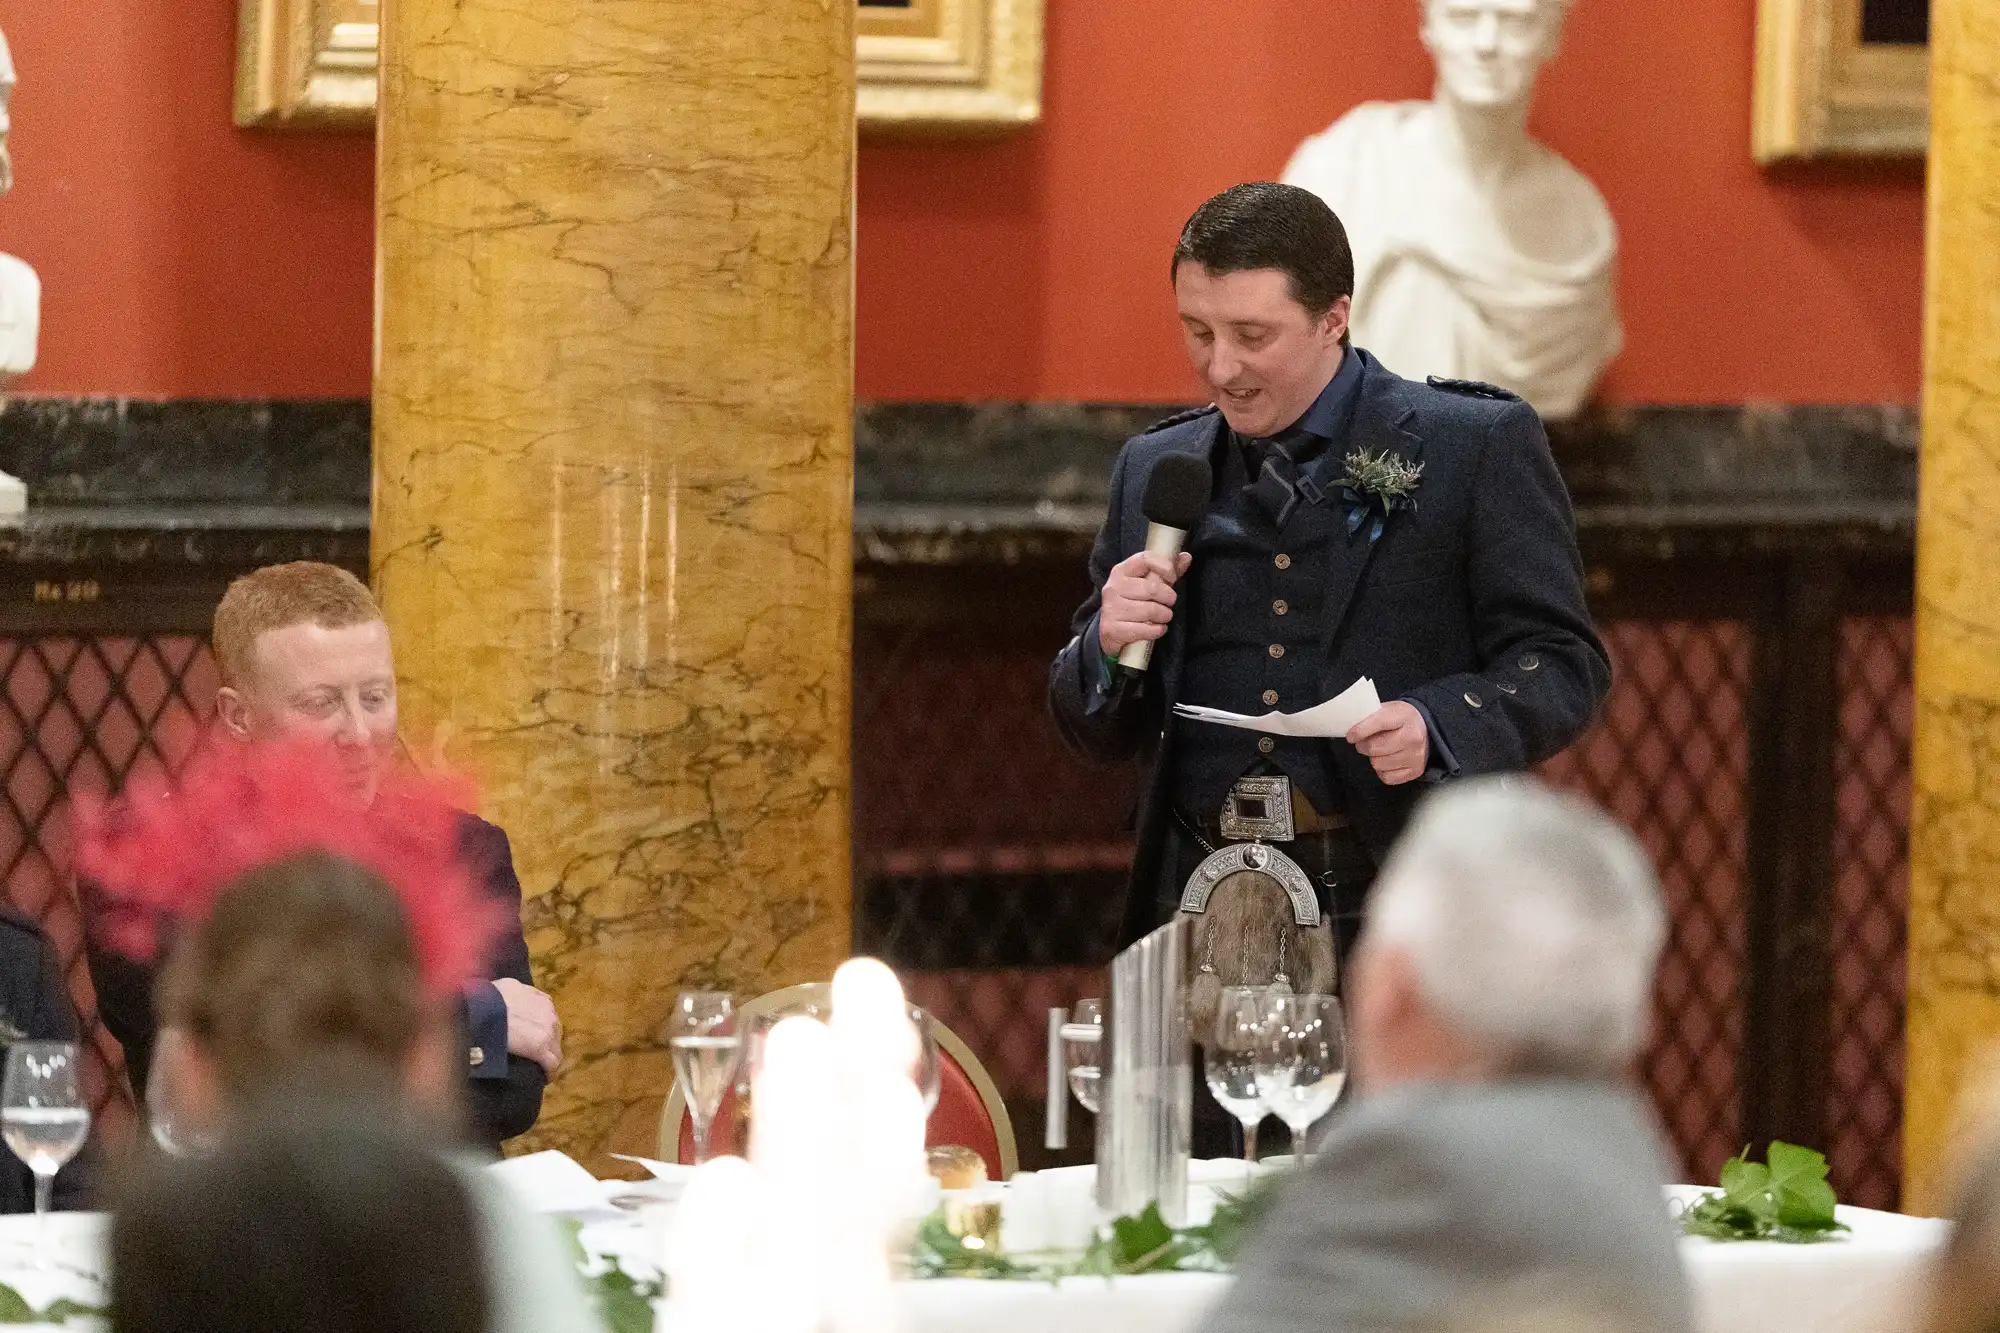 A man in traditional Scottish attire speaks into a microphone while holding a piece of paper at a formal event with seated guests.